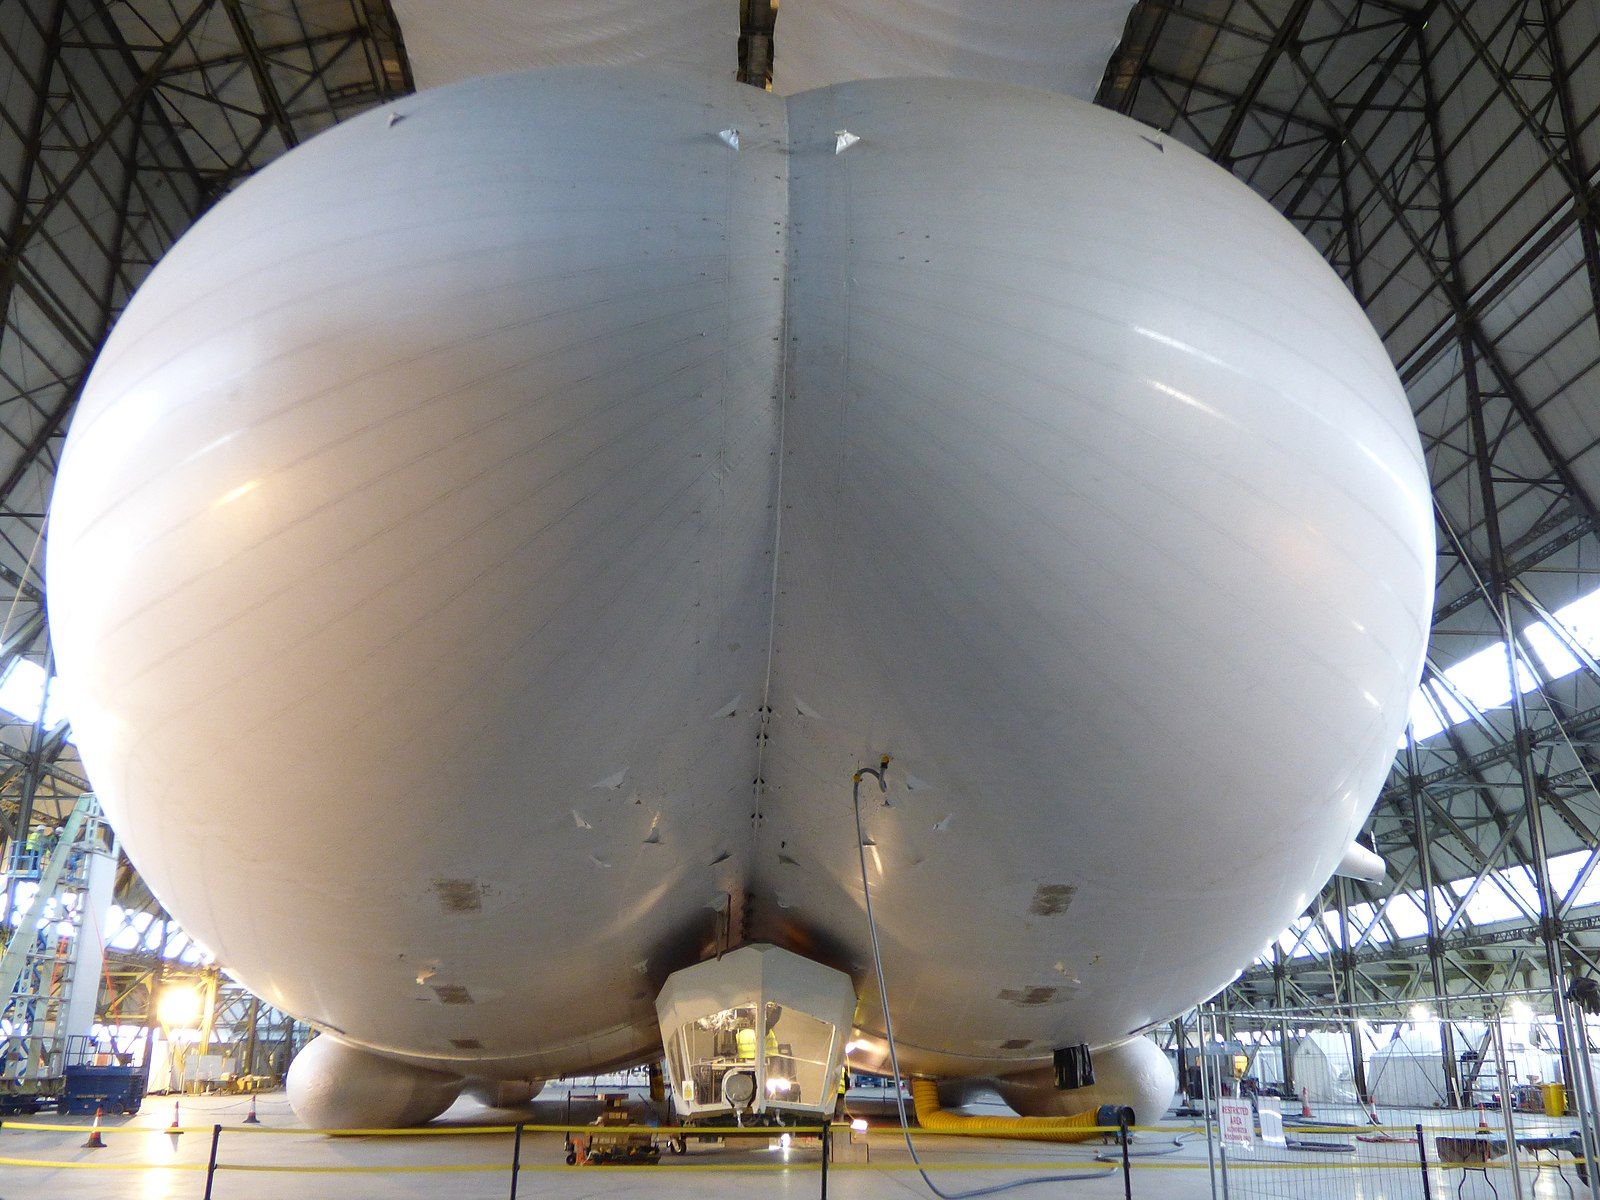 Hot air specialists examine the undercarriage of the cruiser Kardashian